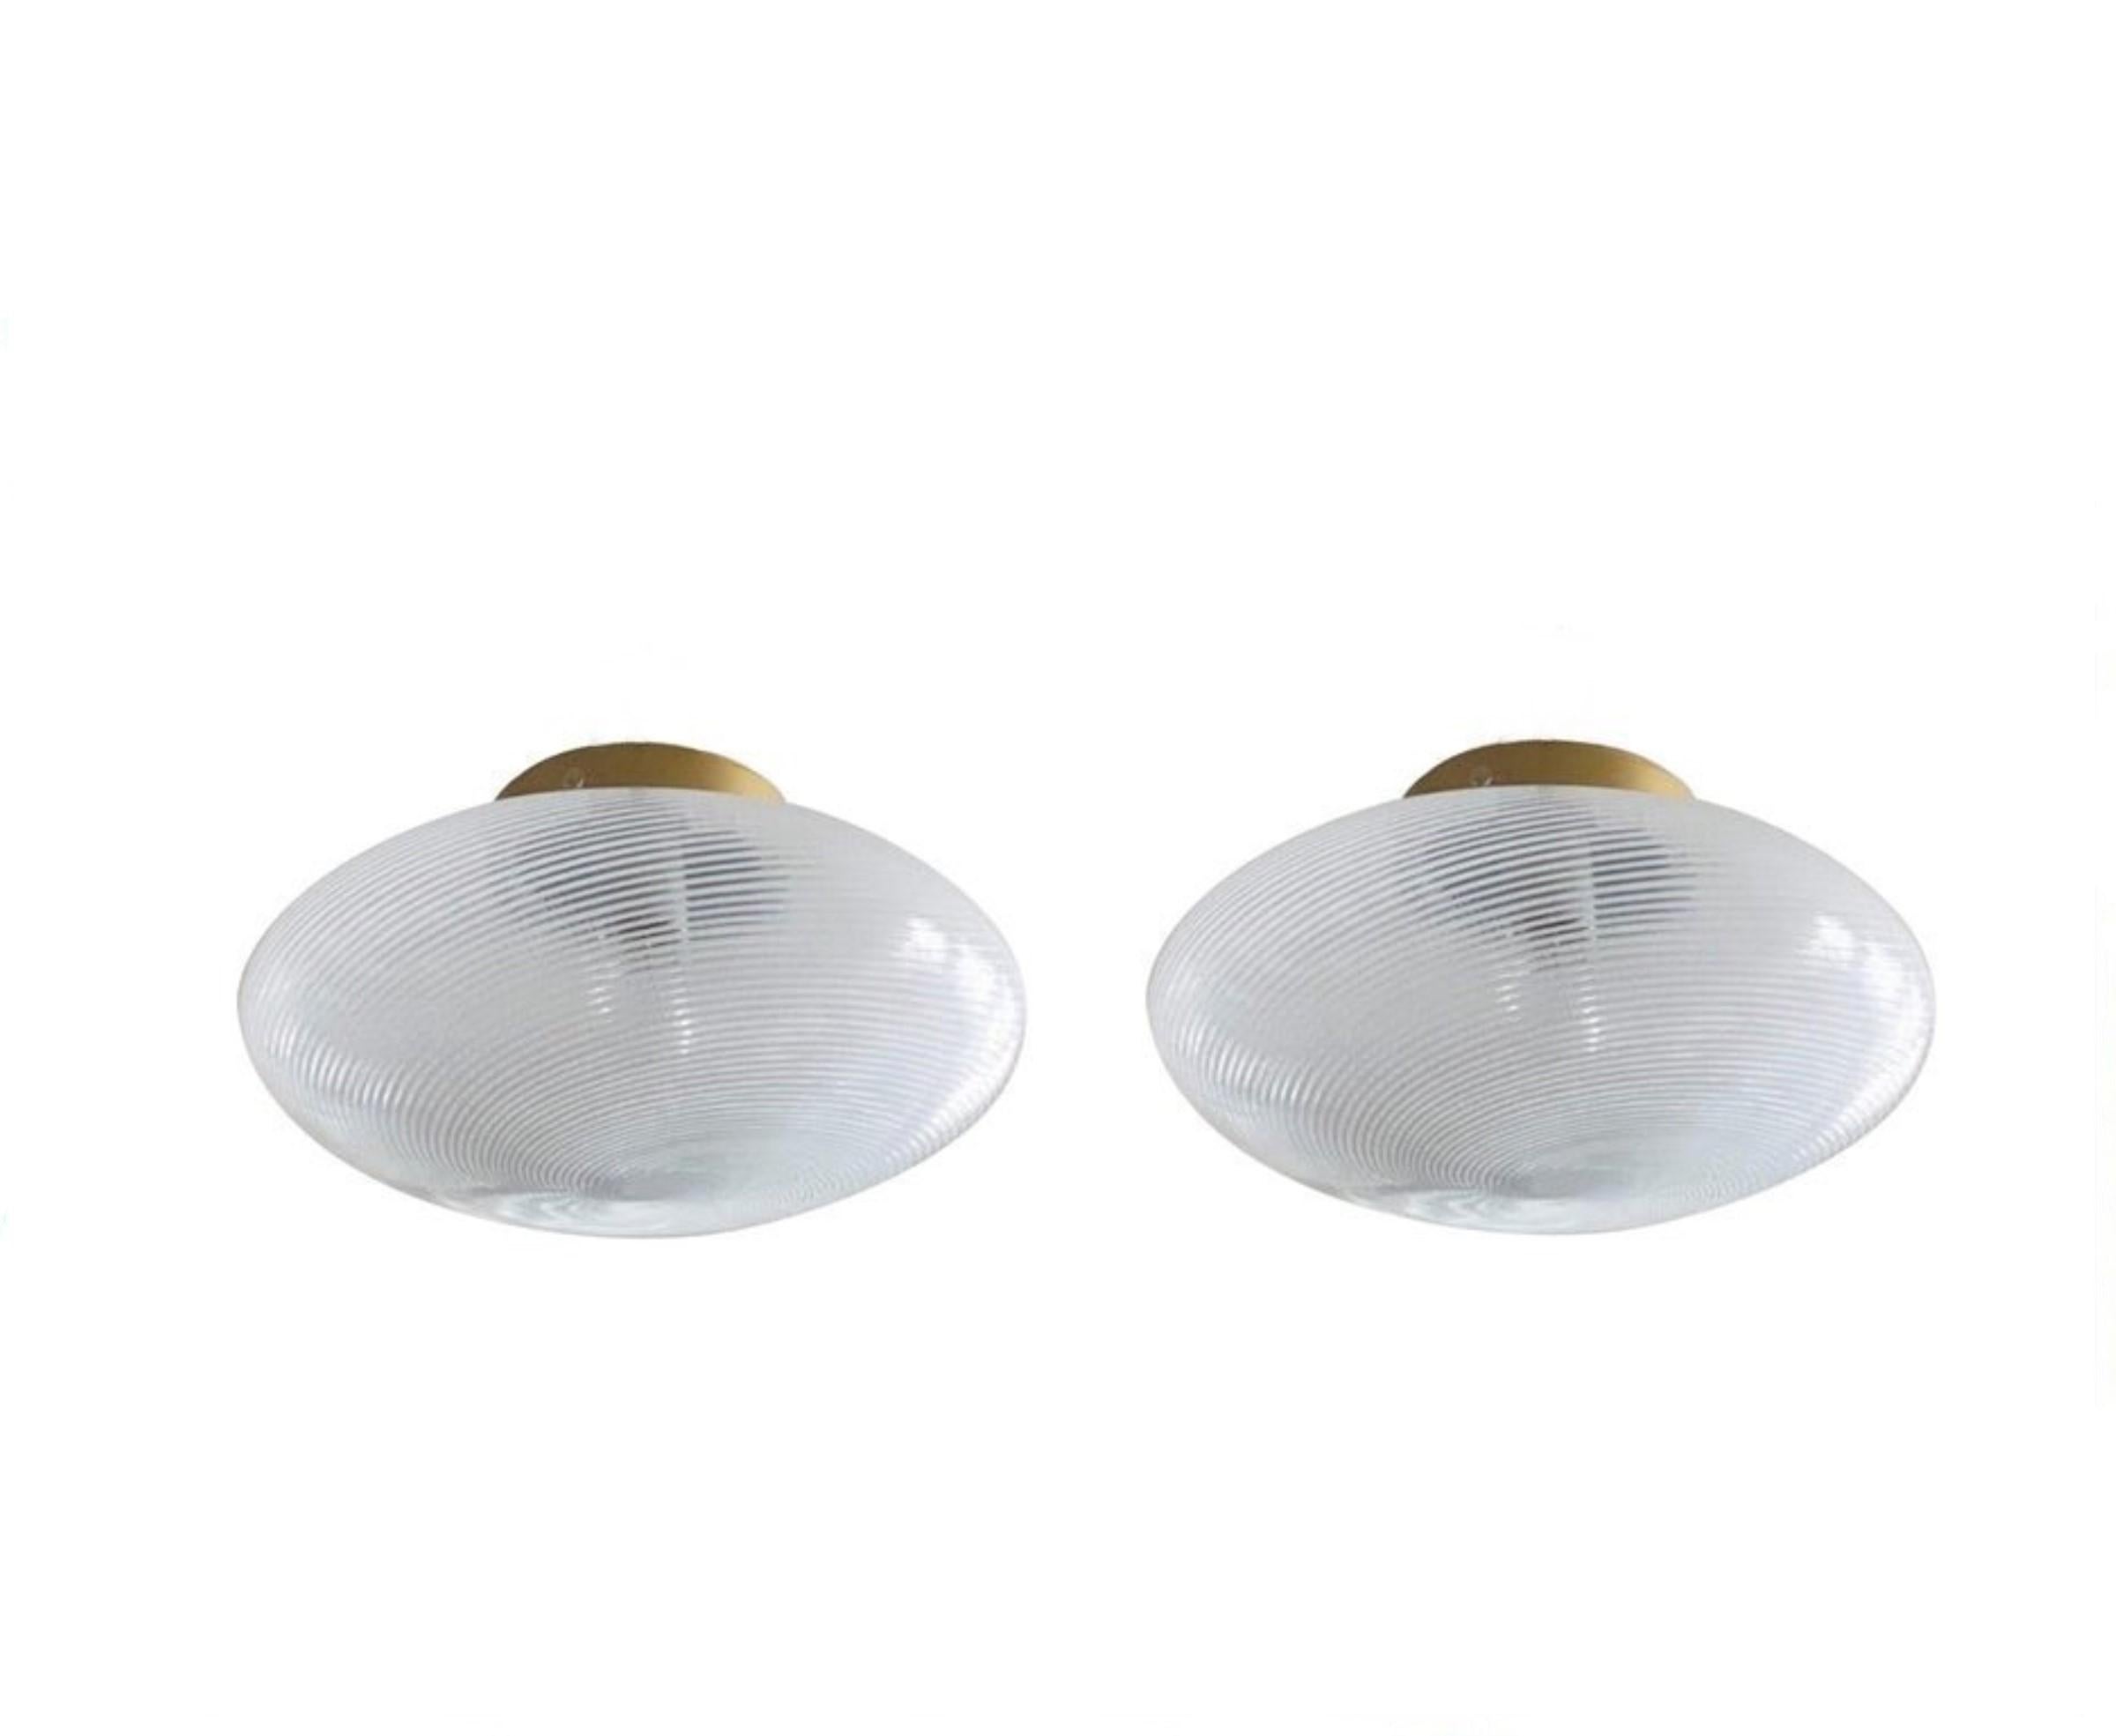 A pair of large flush mounts by Ludovico Diaz de Santillana for Venini, Series -Tessuto-, Italy, 1970s. Hand blown from white and clear Murano glass, brass mounted.
Each flush mount takes one E27 large sized bulb up to 100Watt. Both pieces in very